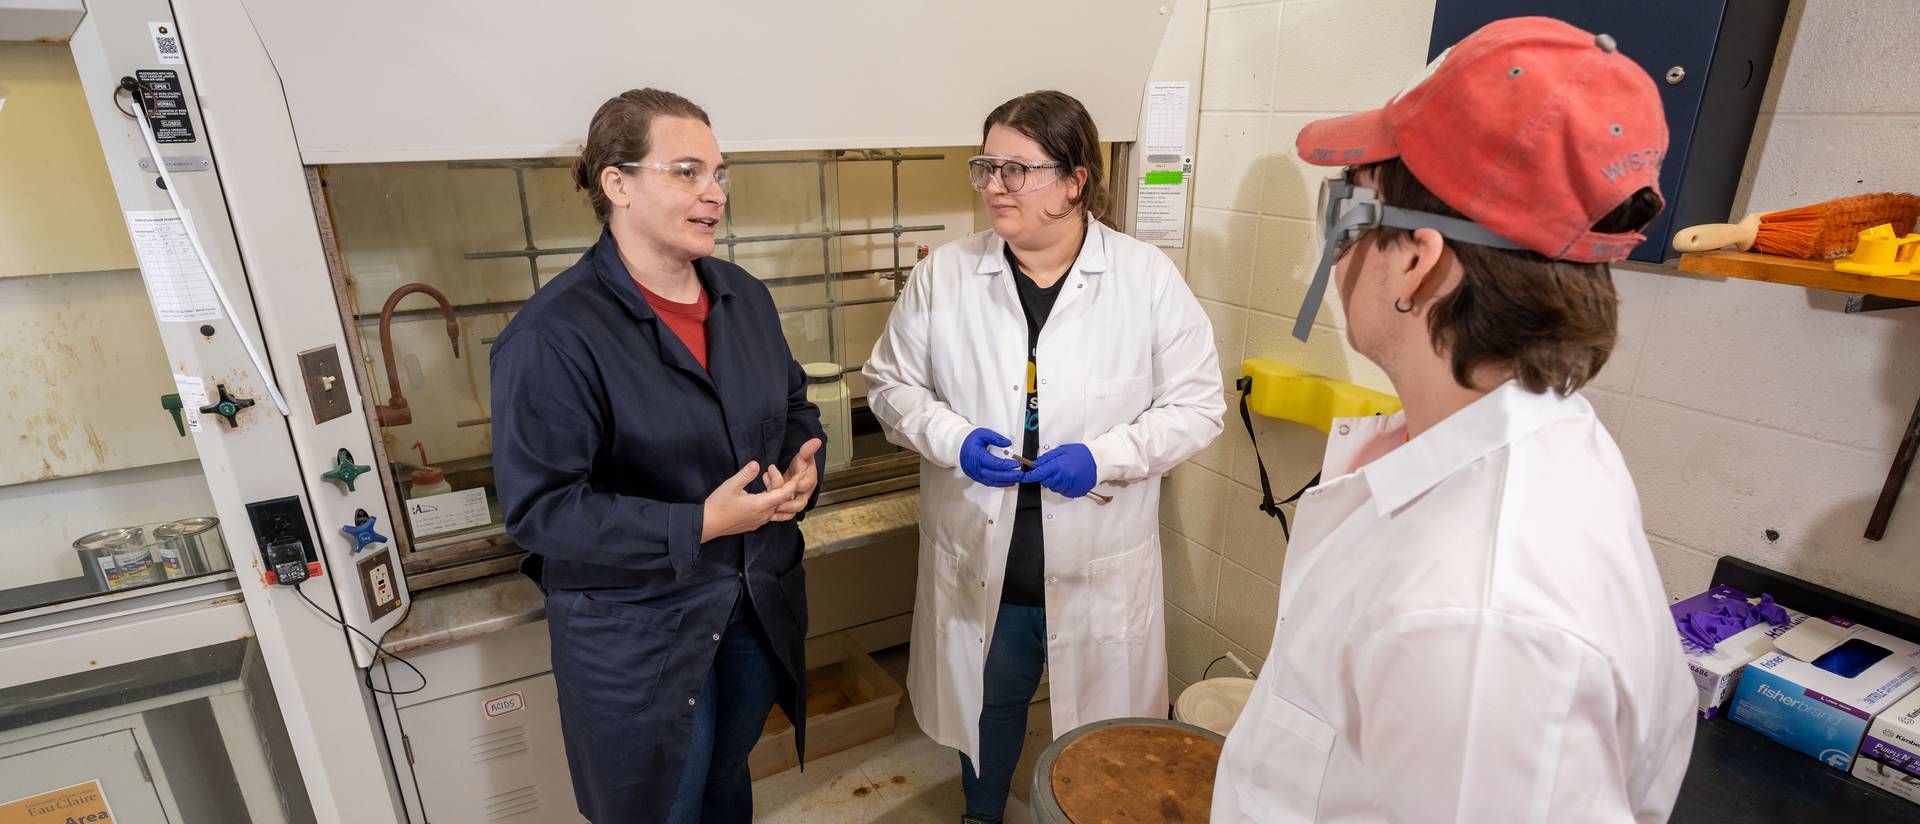 UW-Eau Claire works on anti-corrosive pigment as part of defense subcontract